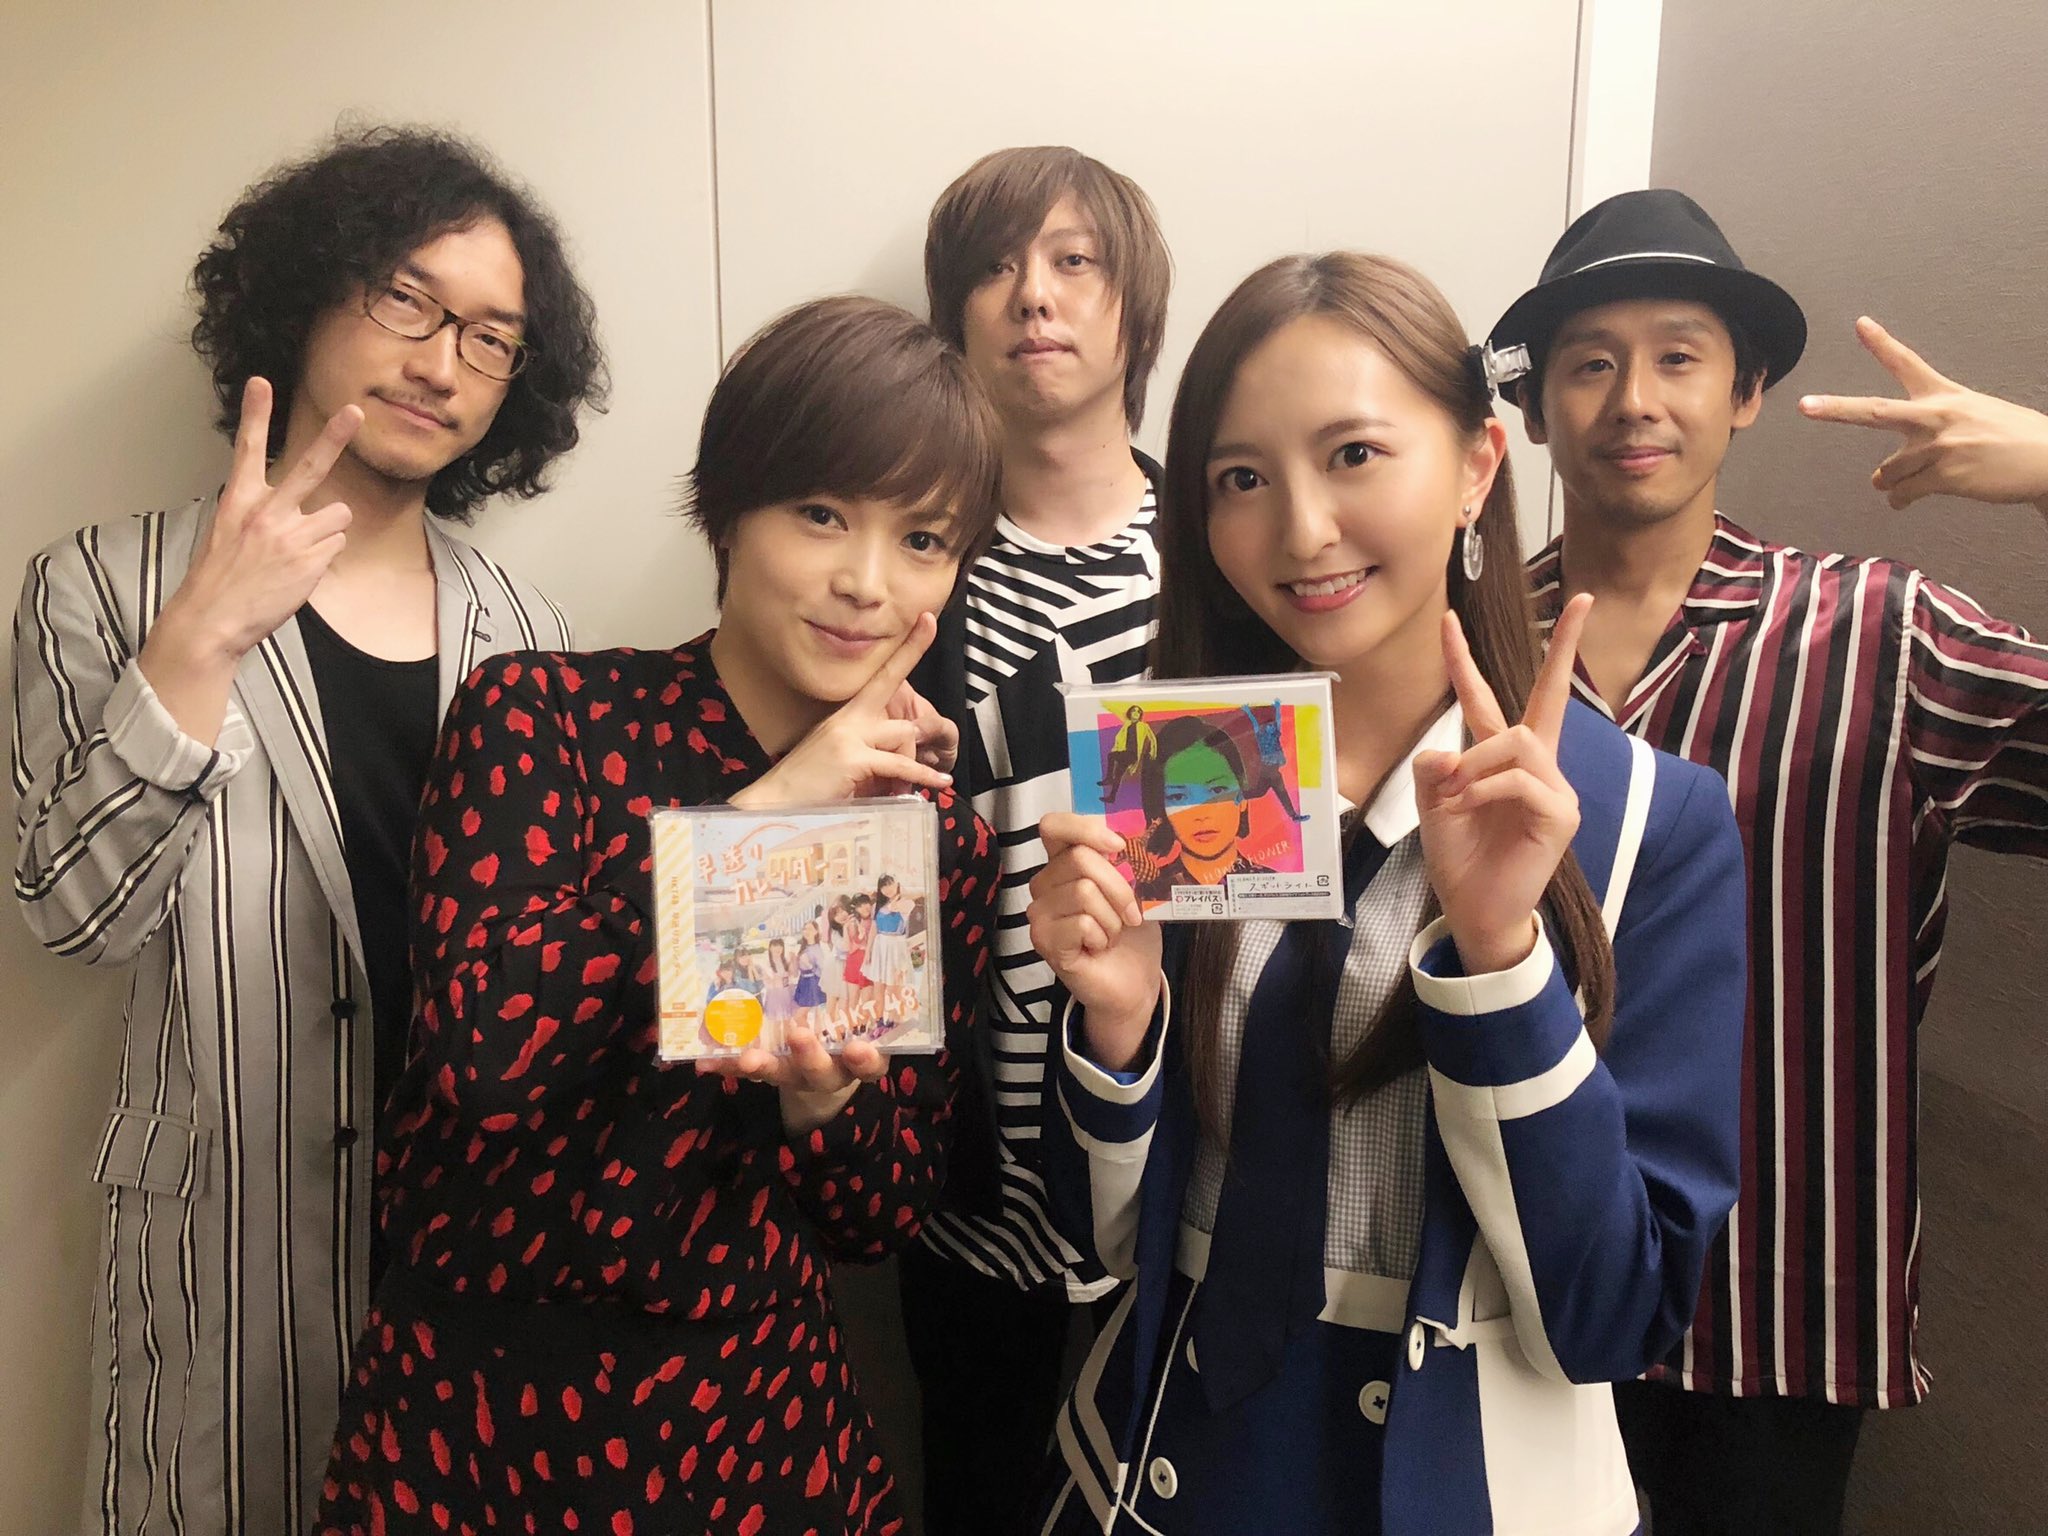 Flower Flower Performs Powerful At Music Station Yui Lover Fansite Community